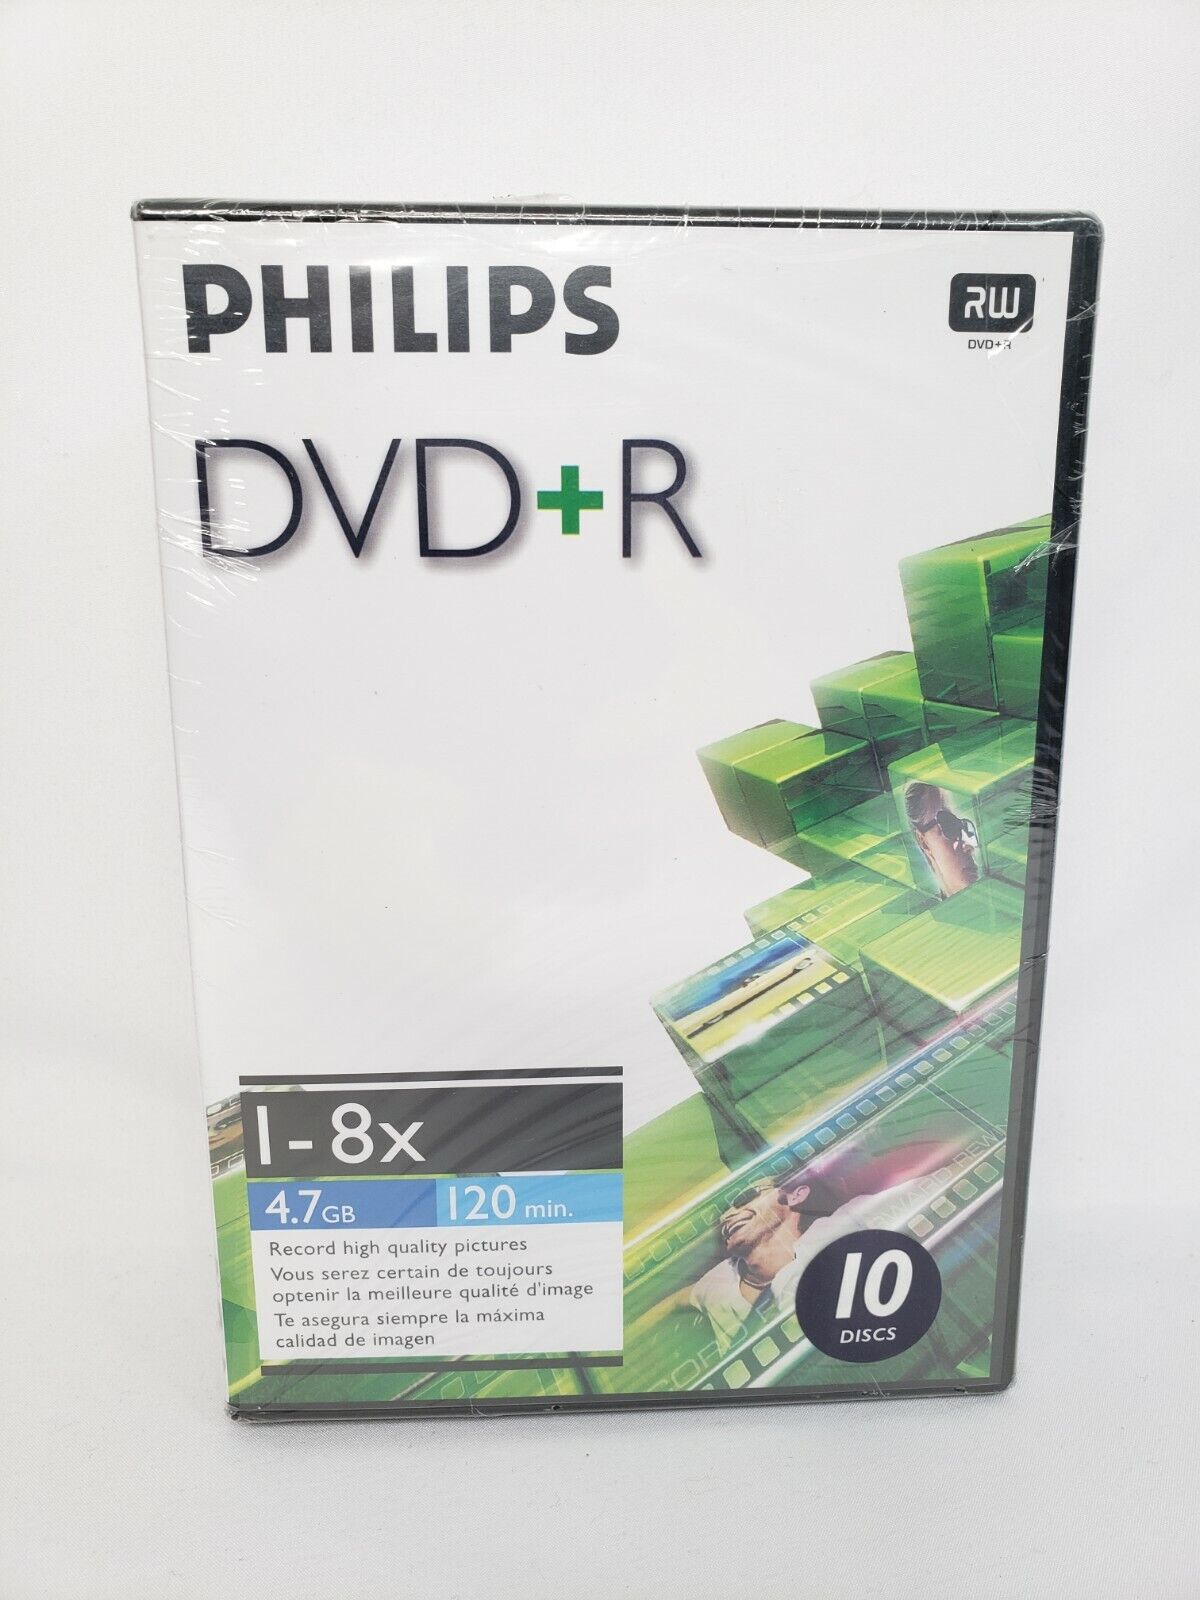 NEW SEALED PHILIPS  DVD + R 1-8x 10 Pack 4.7GB 120 Min  Philips DR4S8T10F